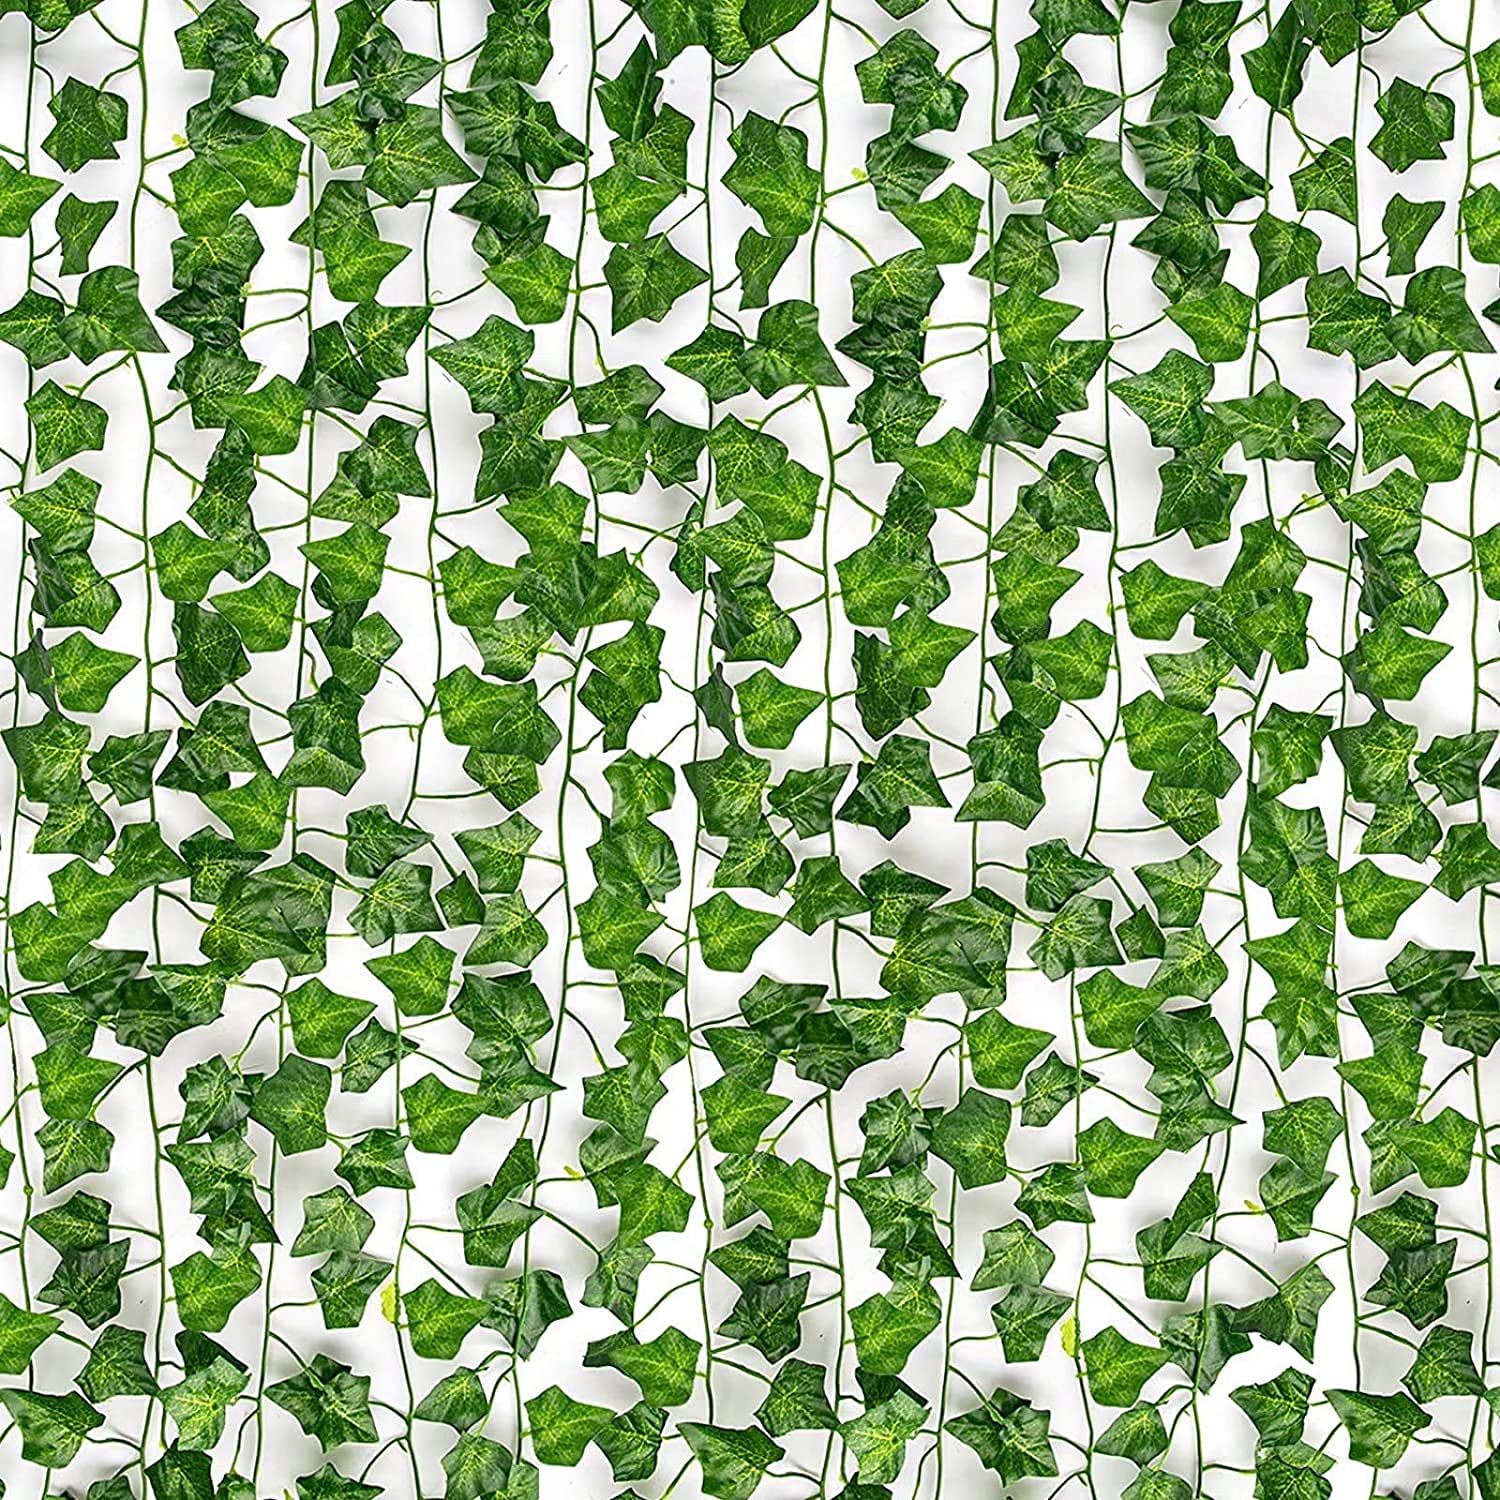  WEISPARK 12 Pack Fake Ivy Leaves with Butterflies